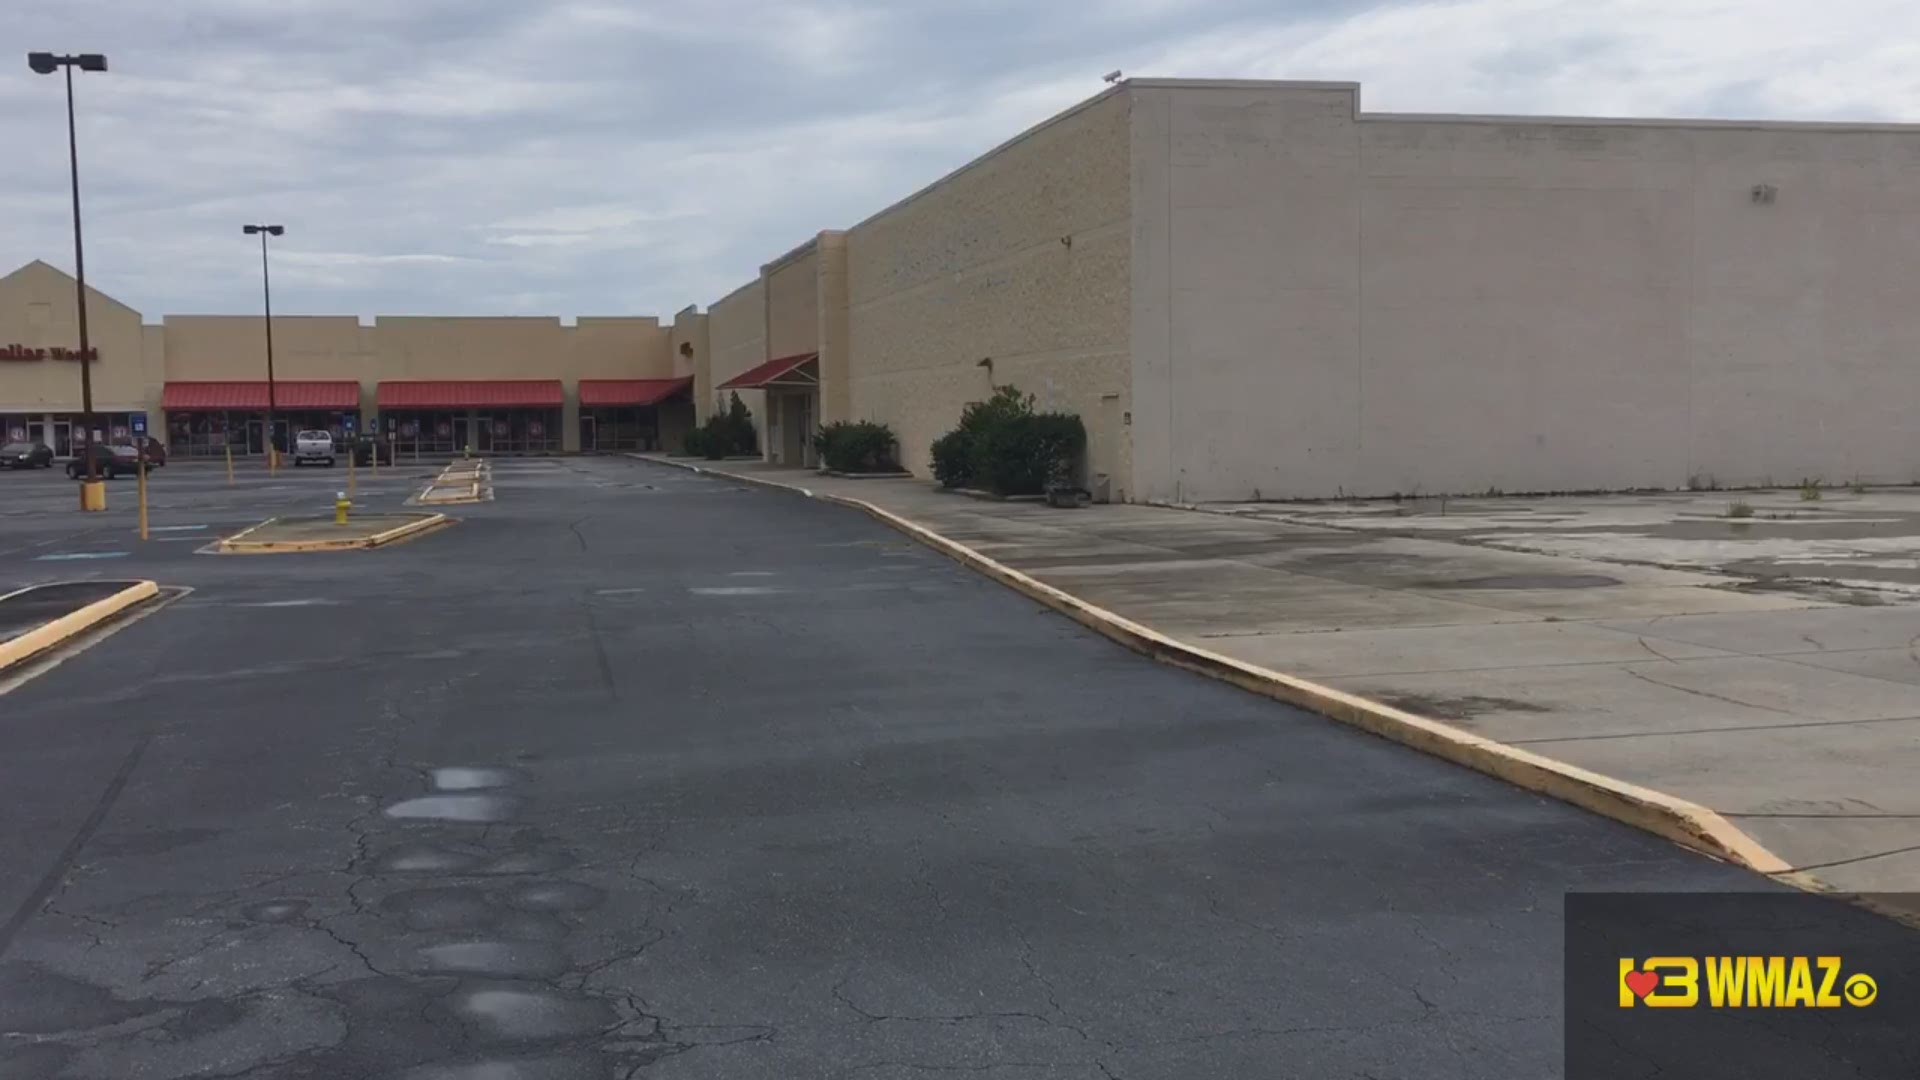 Opened in 1961, Westgate Mall was once the largest Mall in Georgia. Today, the center is full of empty stores.